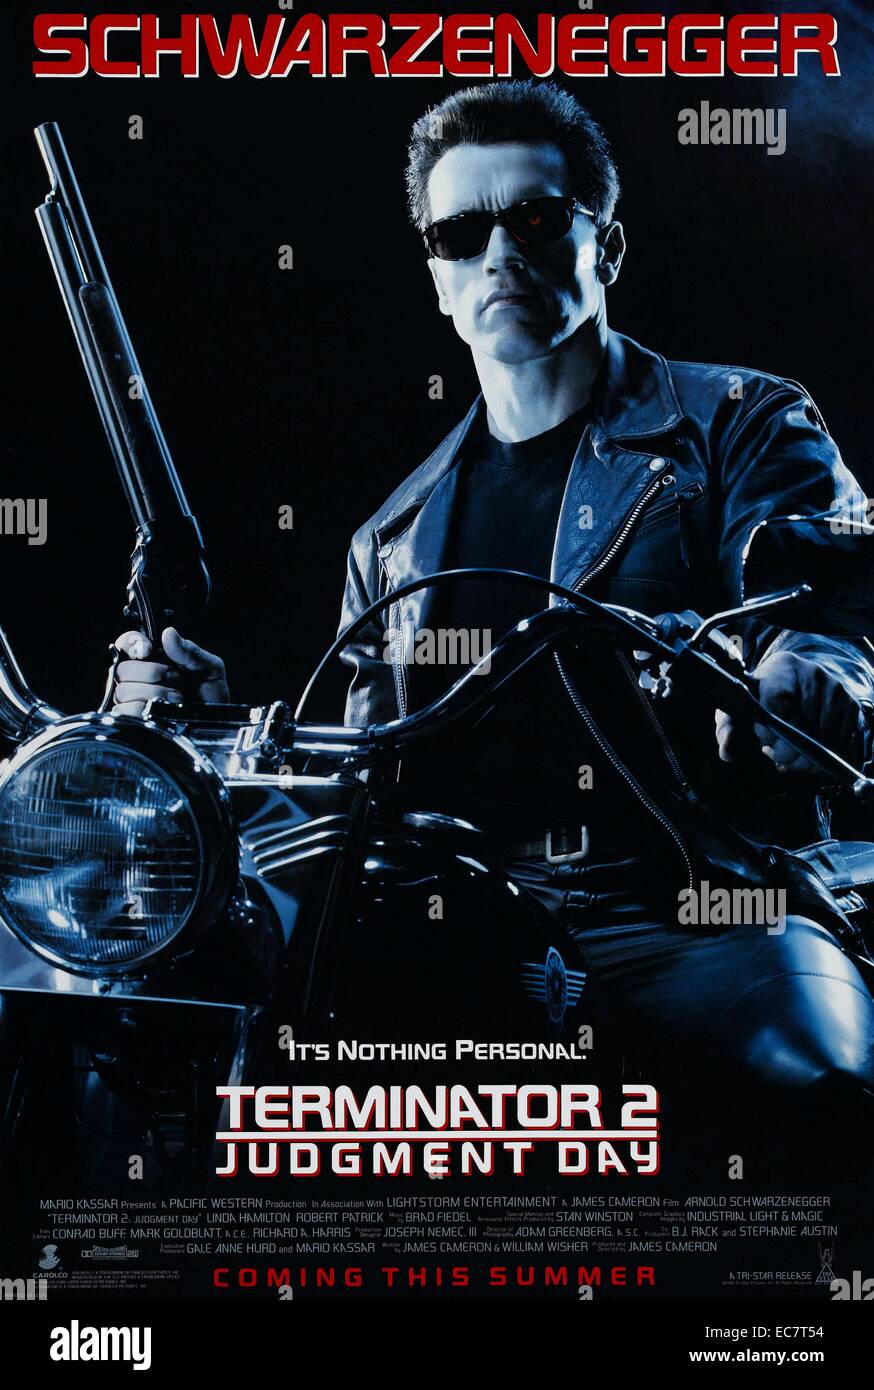 Terminator 2: Judgment Day is a 1991 American science fiction film written, produced and directed by James Cameron. The film stars Arnold Schwarzenegger, Linda Hamilton, Robert Patrick and Edward Furlong. It is the second installment of the Terminator franchise and the sequel to the 1984 film The Terminator. It follows Sarah Connor and her ten-year-old son John as they are pursued by a new, more advanced Terminator, the liquid metal, shapeshifting T-1000. Stock Photo